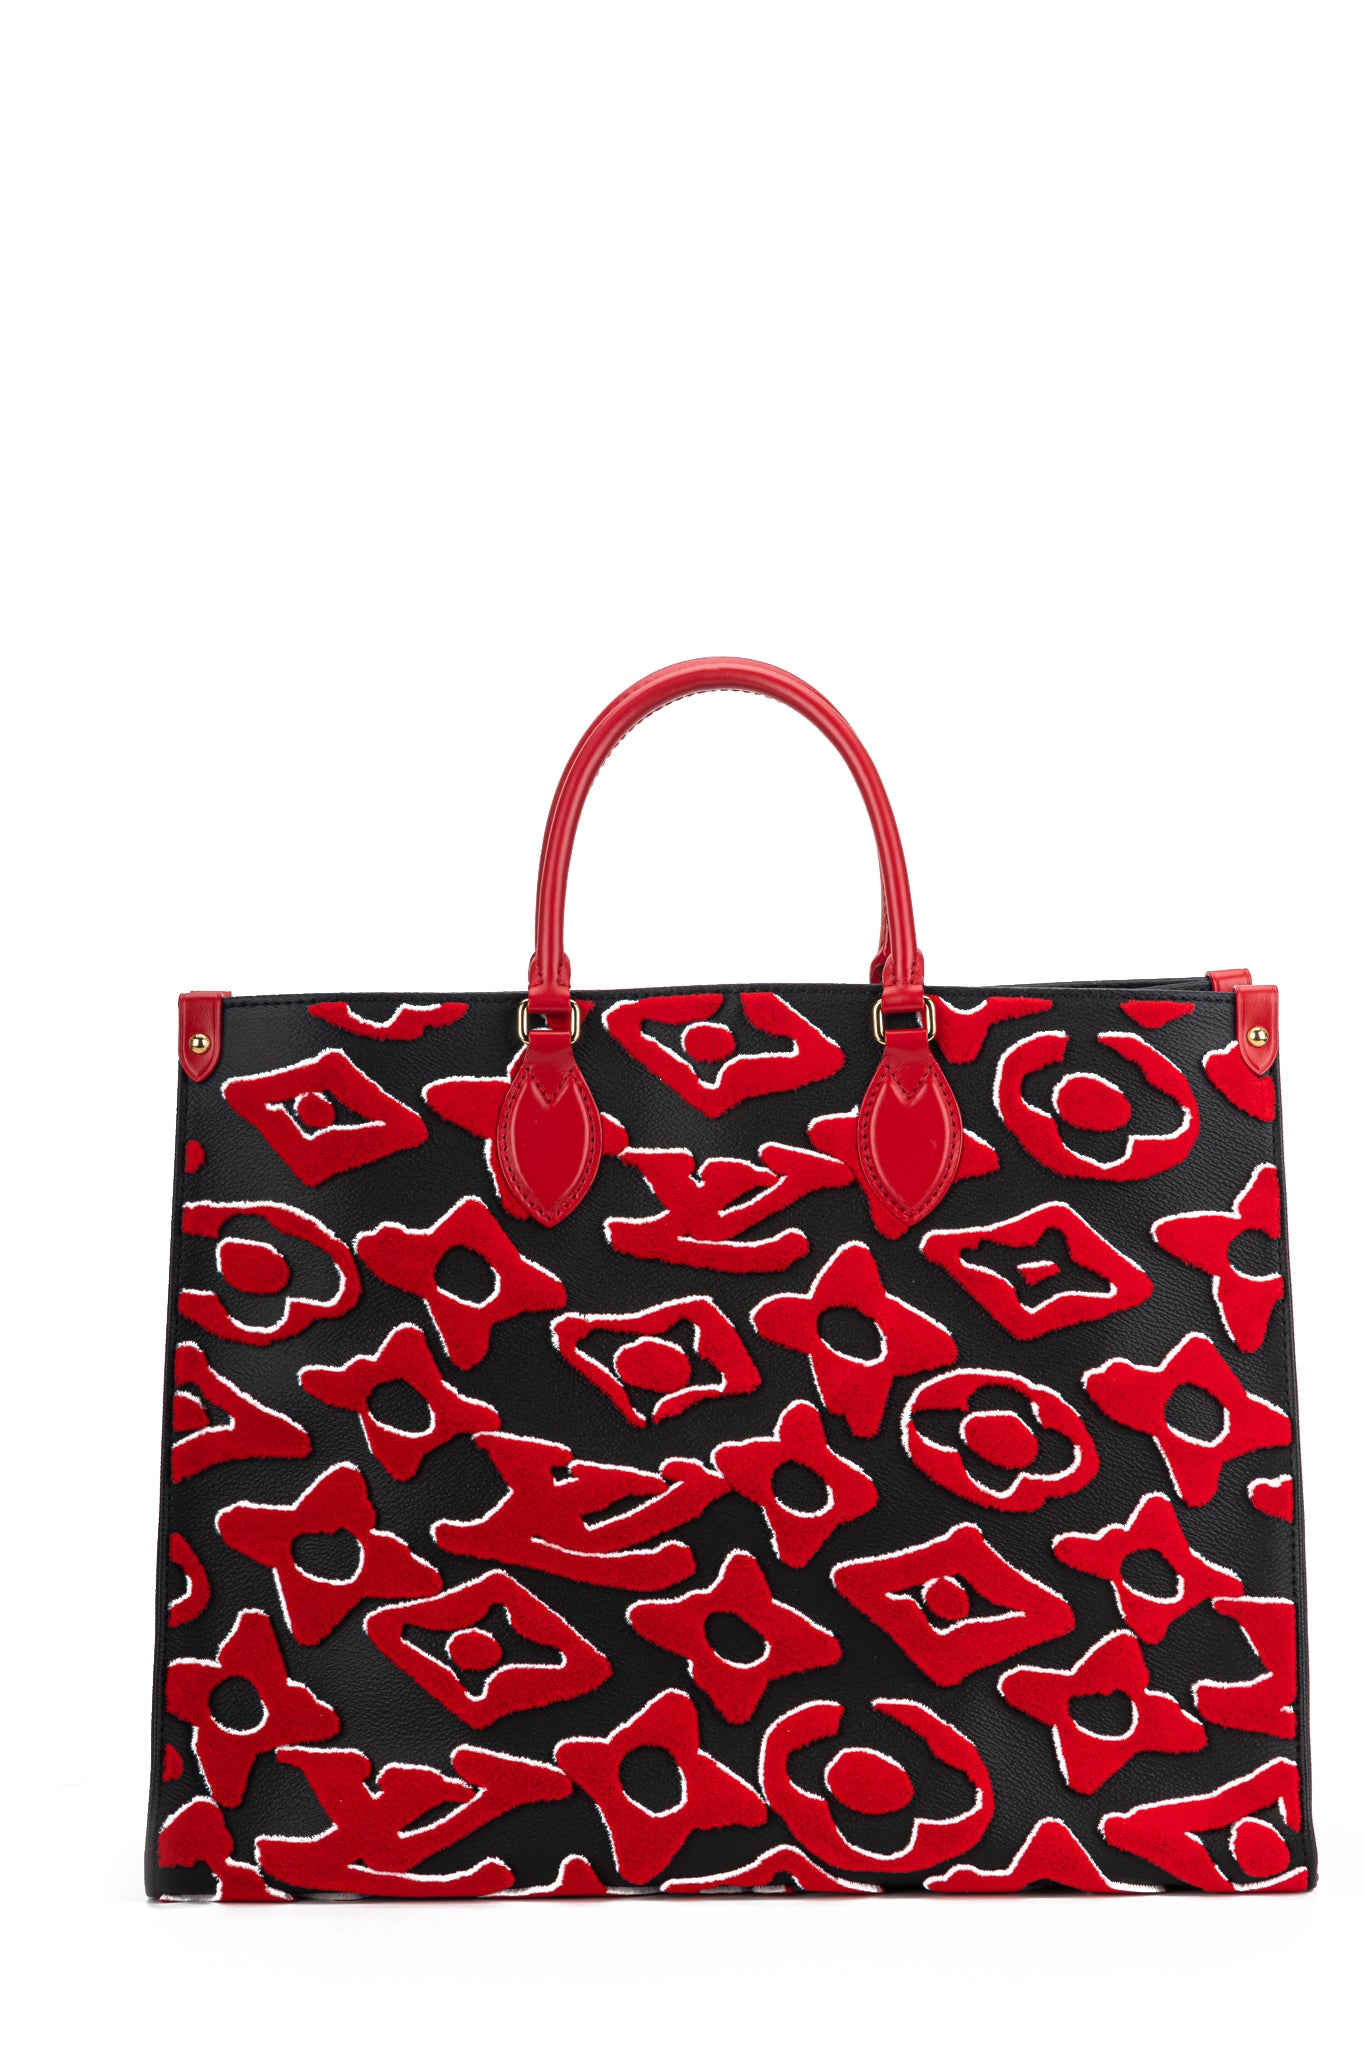 limited edition louis vuitton black and red bag